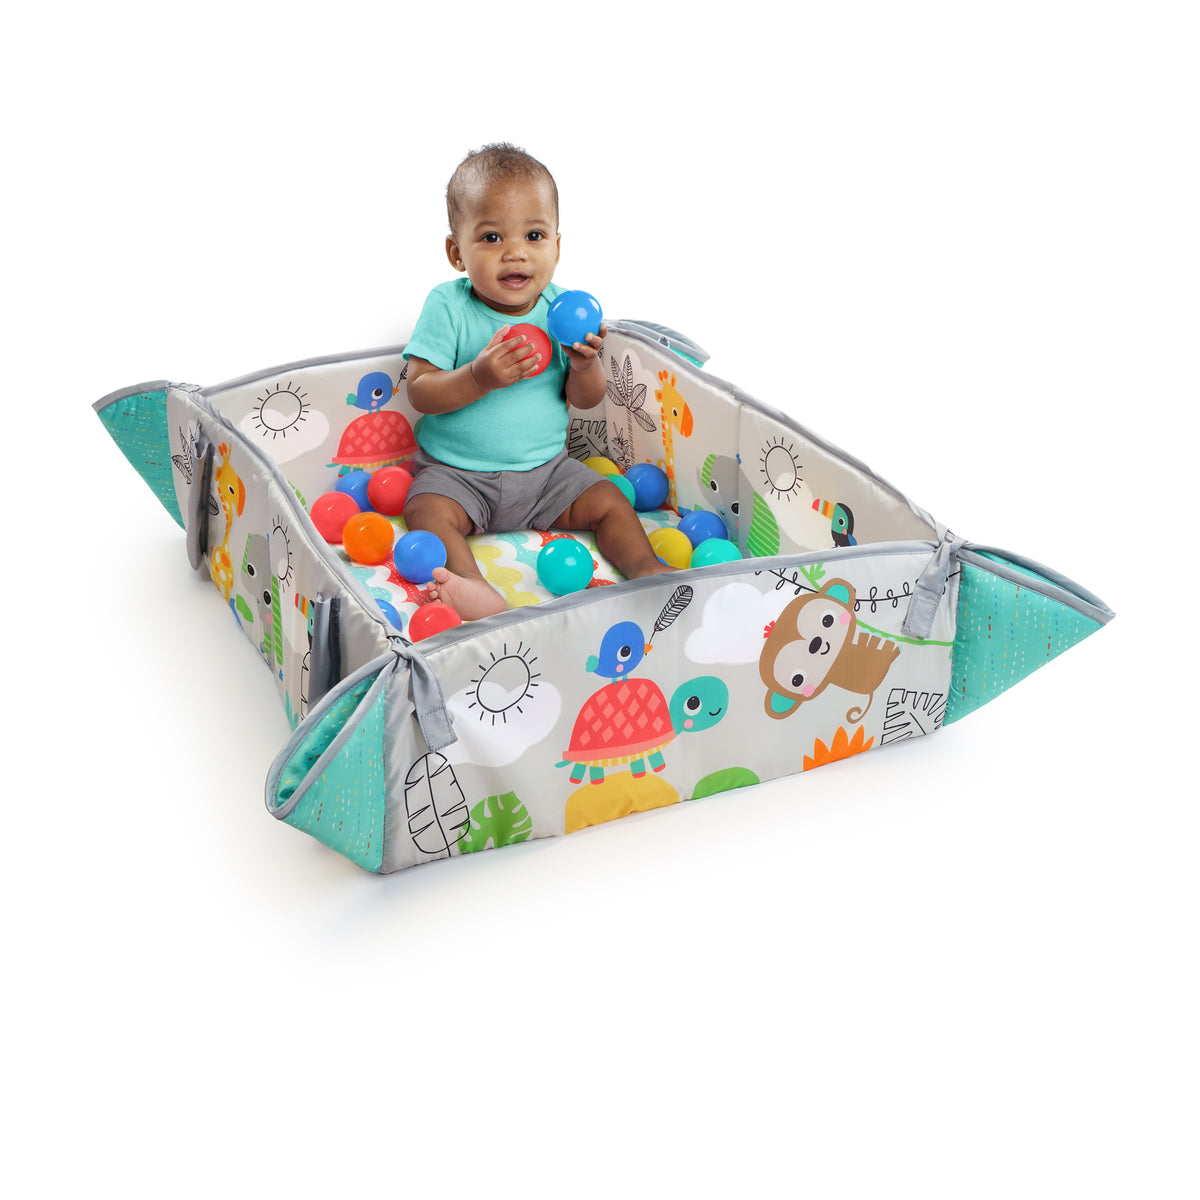 5-in-1 Your Way Ball Play Activity Gym & Ball Pit - Totally